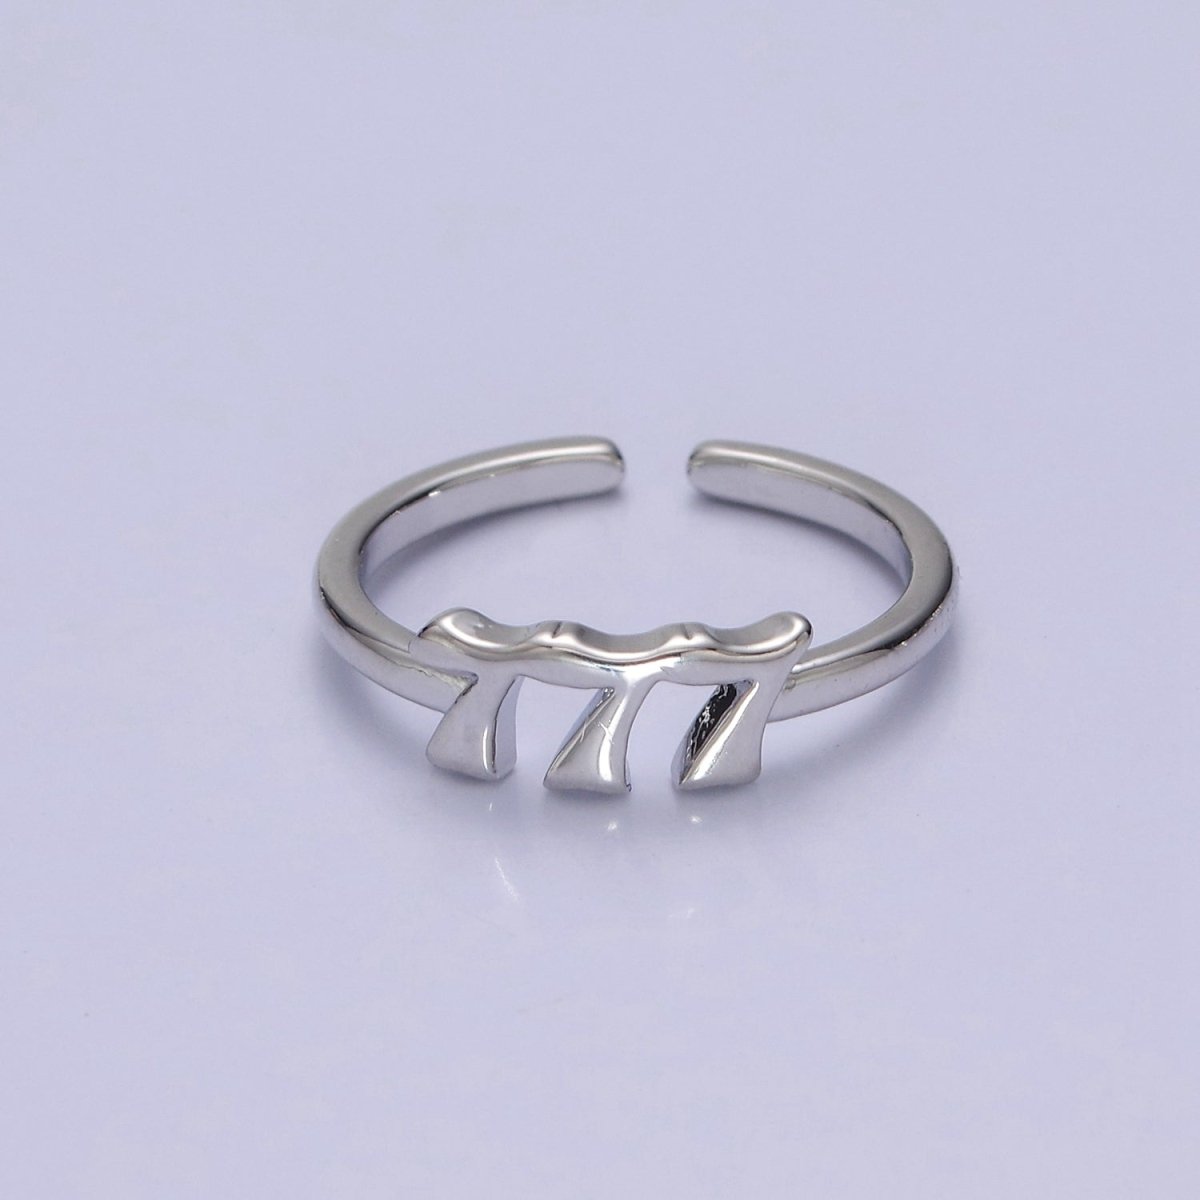 111 222 333 444 555 777 999 888 Angel Number Ring Silver Custom Jewelry Number Ring Open Adjustable Trend Ring O2047-O2055 - DLUXCA